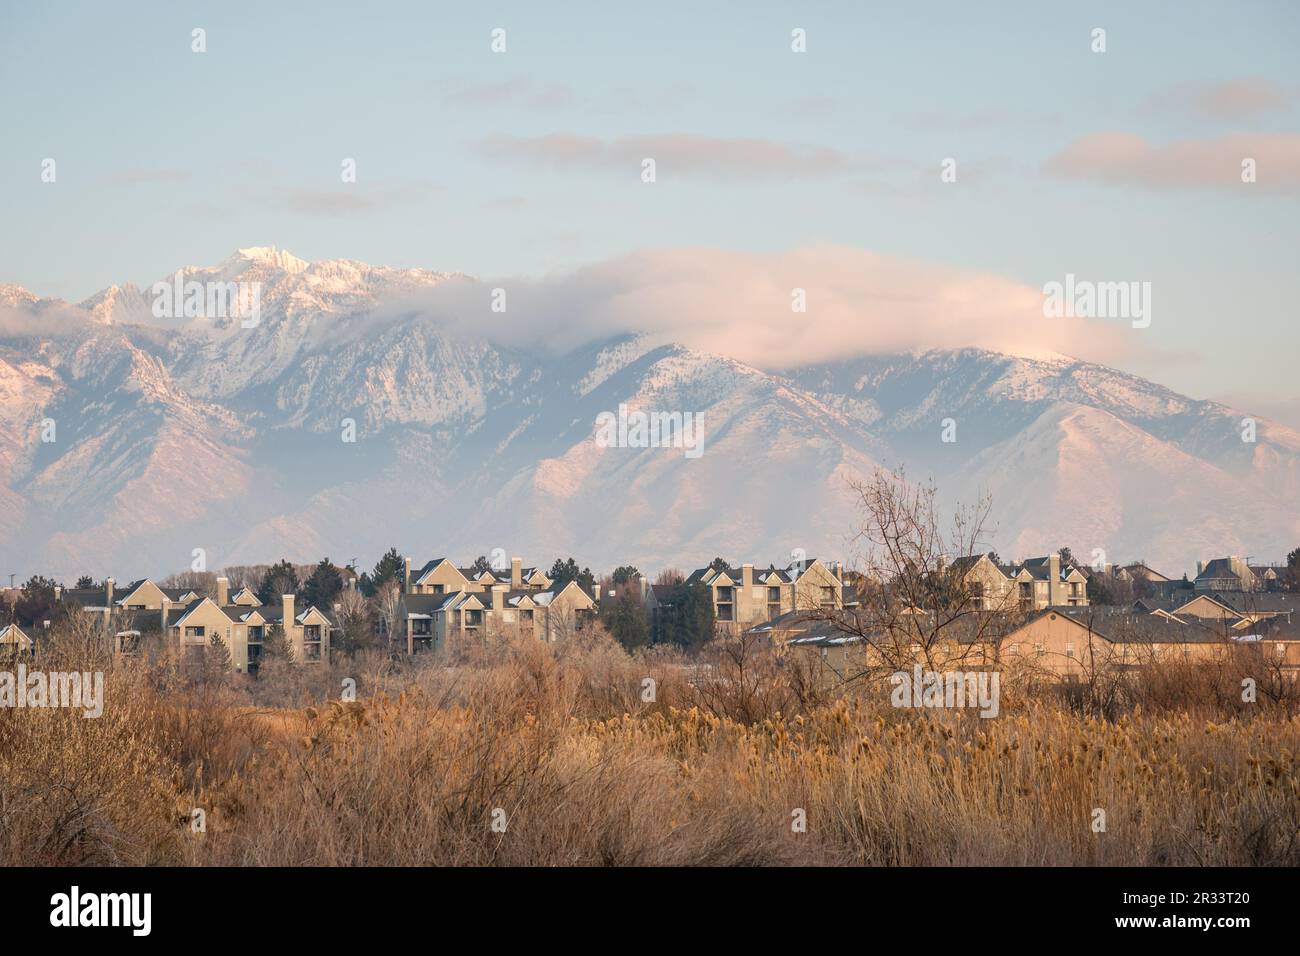 Neighborhood of new homes with snow covered mountains in background. Stock Photo